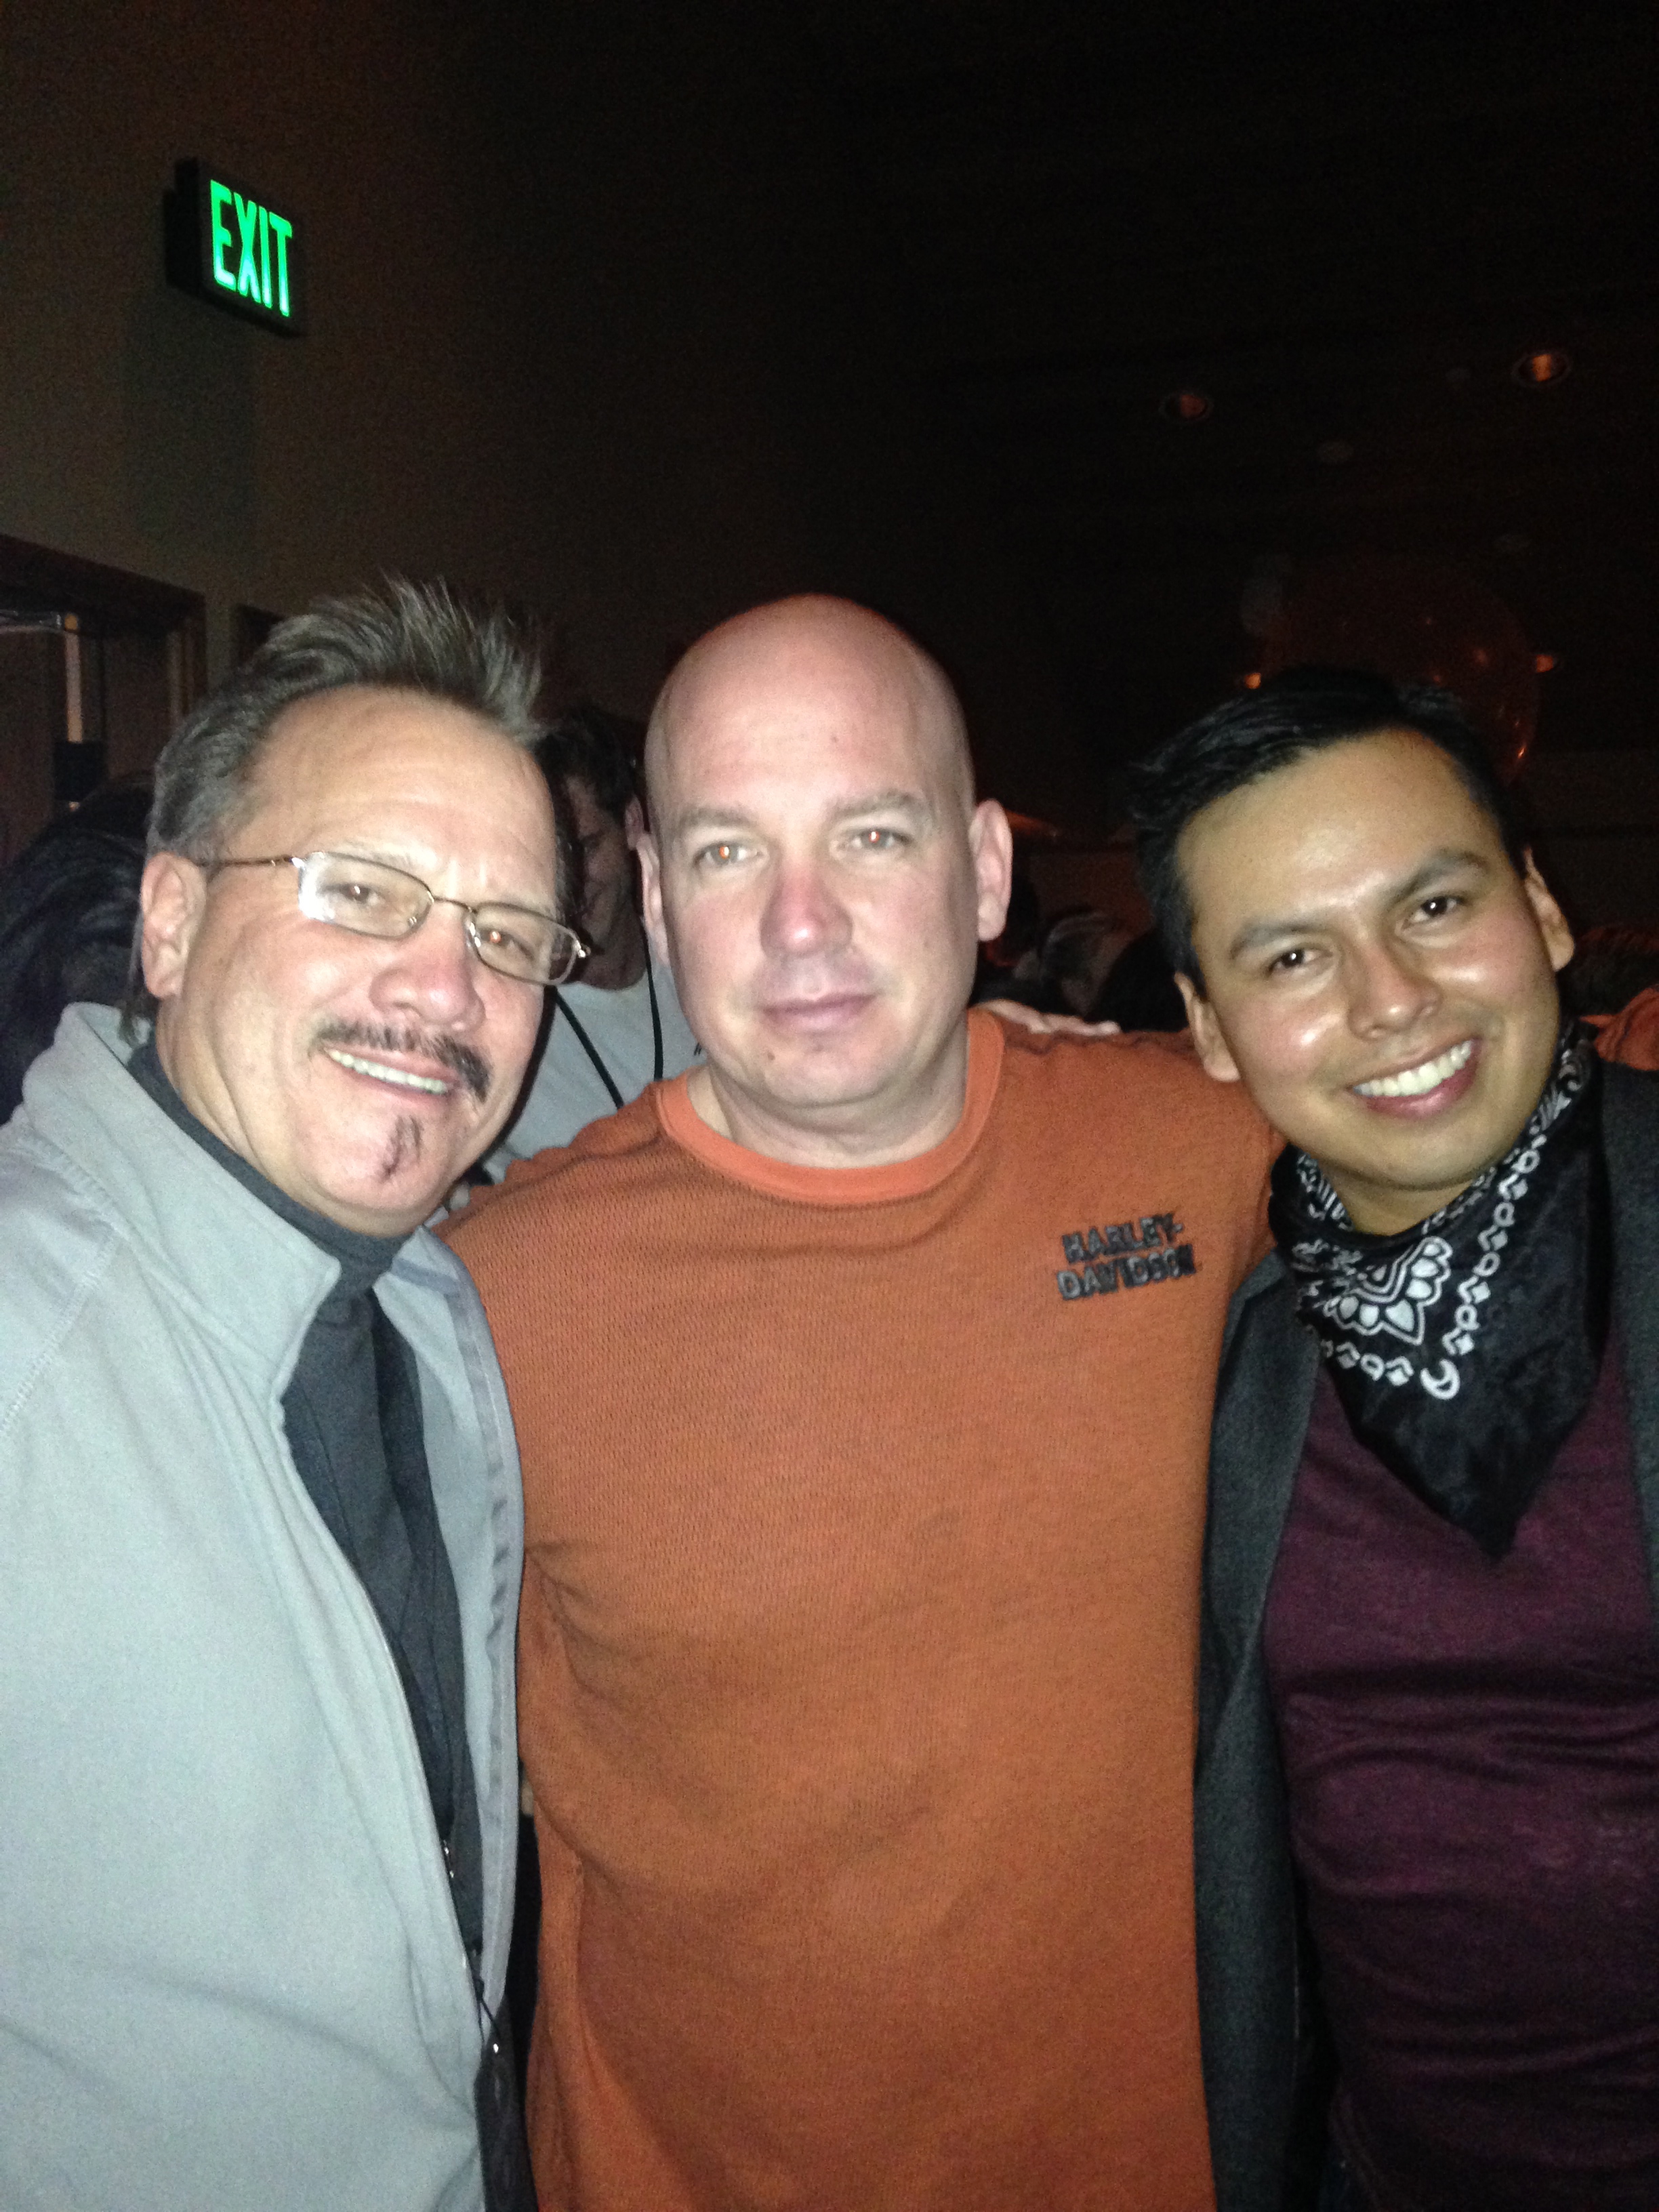 JD Garfield, Tom and Jeremiah Bitsui at the opening party at The Sundance Film Festival.